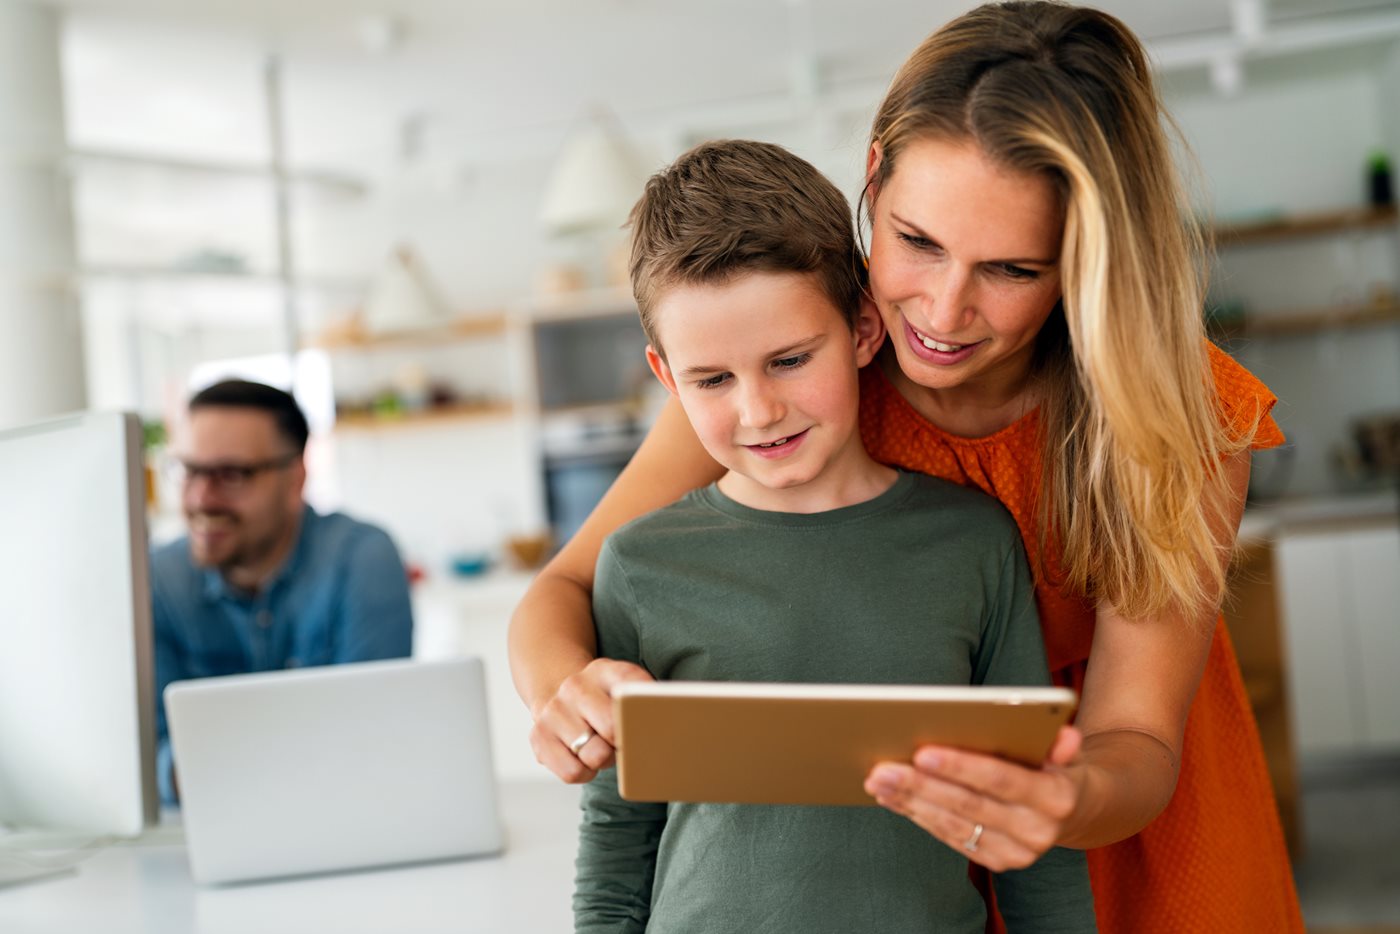 A mom and son look at an iPad together, while a dad works on his laptop in the background thanks to Fidelity Internet